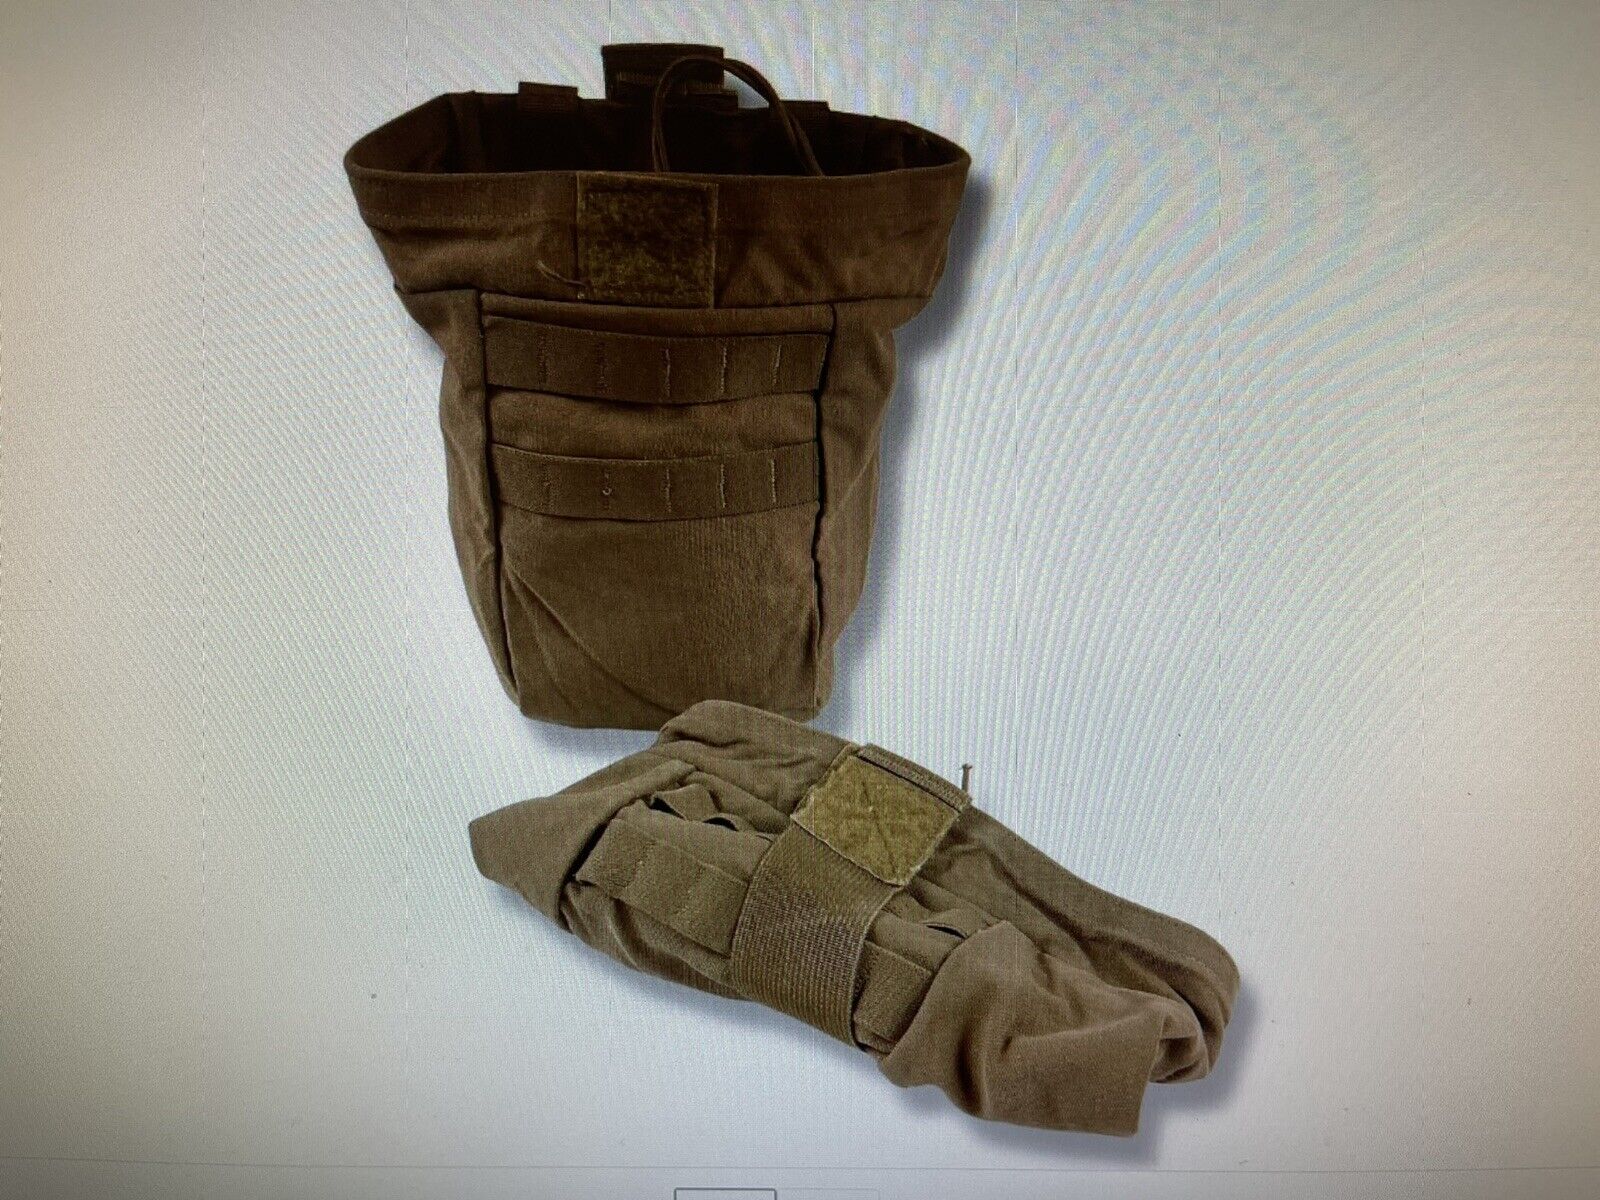 USMC Marine Corps MOLLE Mag Dump Pouch w/Cord Barrel Lock Coyote Brown Excellent